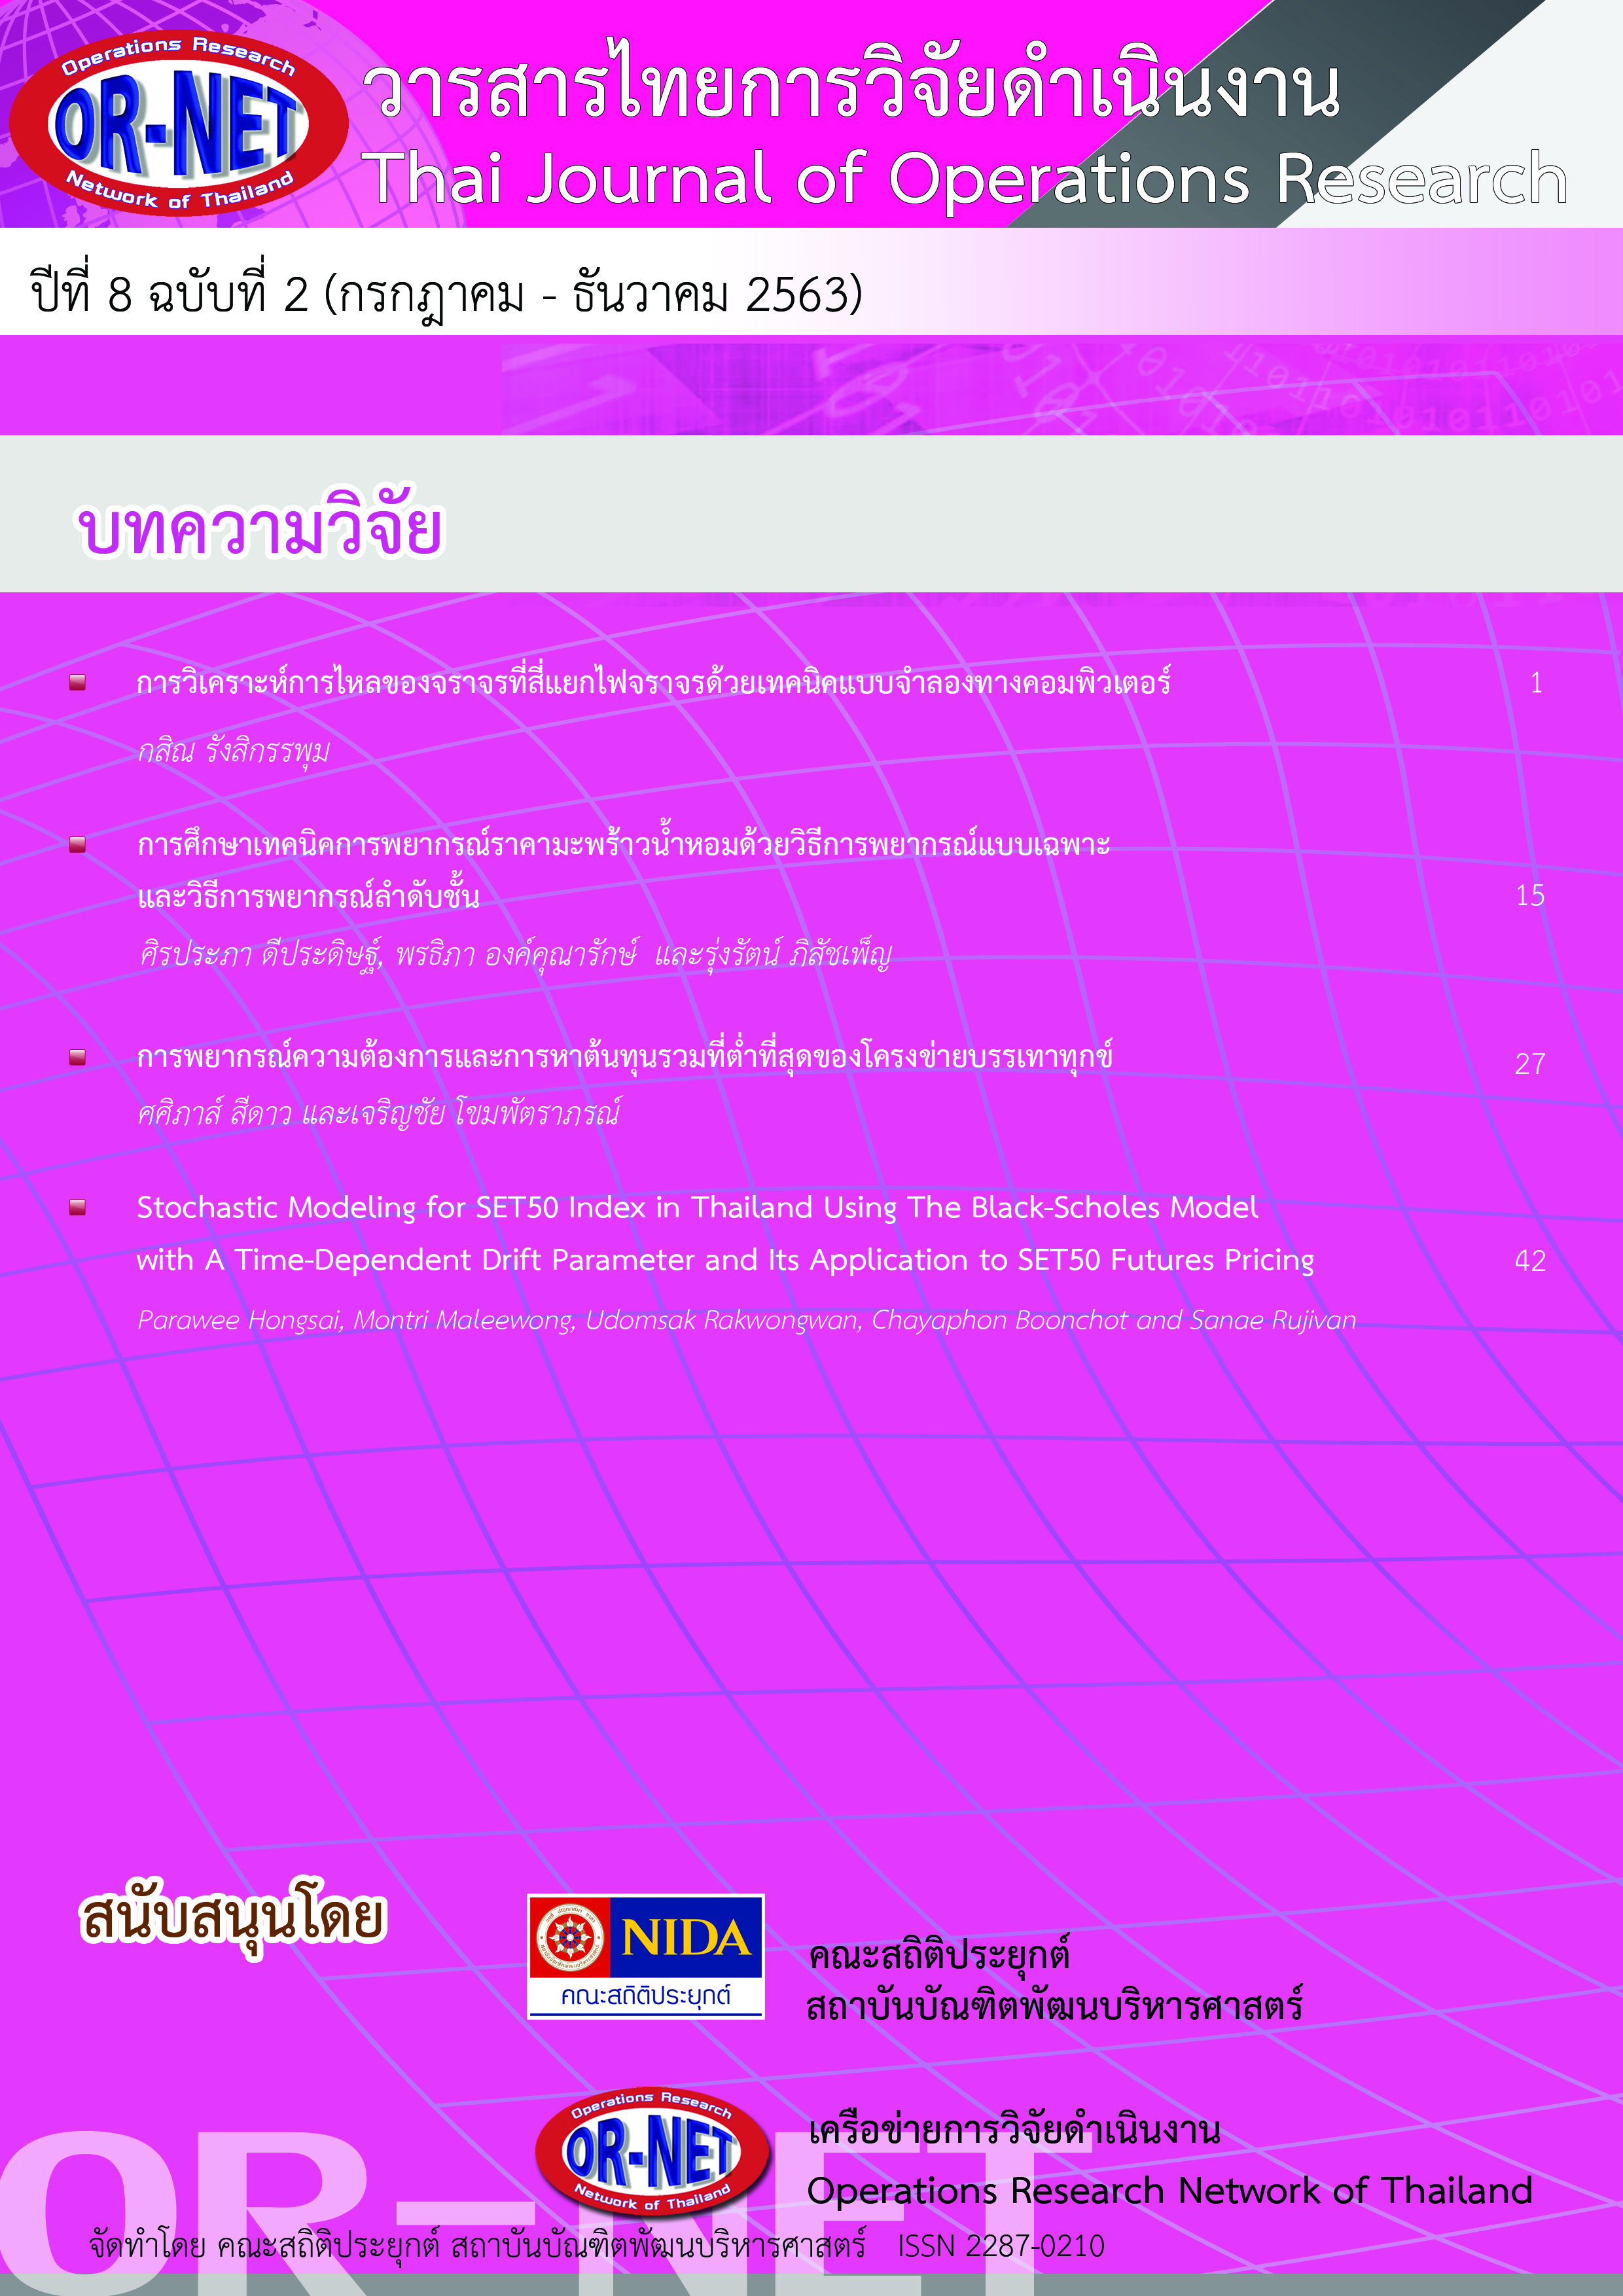 					View Vol. 8 No. 2 (2020): Thai Journal of Operations Research: TJOR Vol 8 No 2 July - December 2020
				